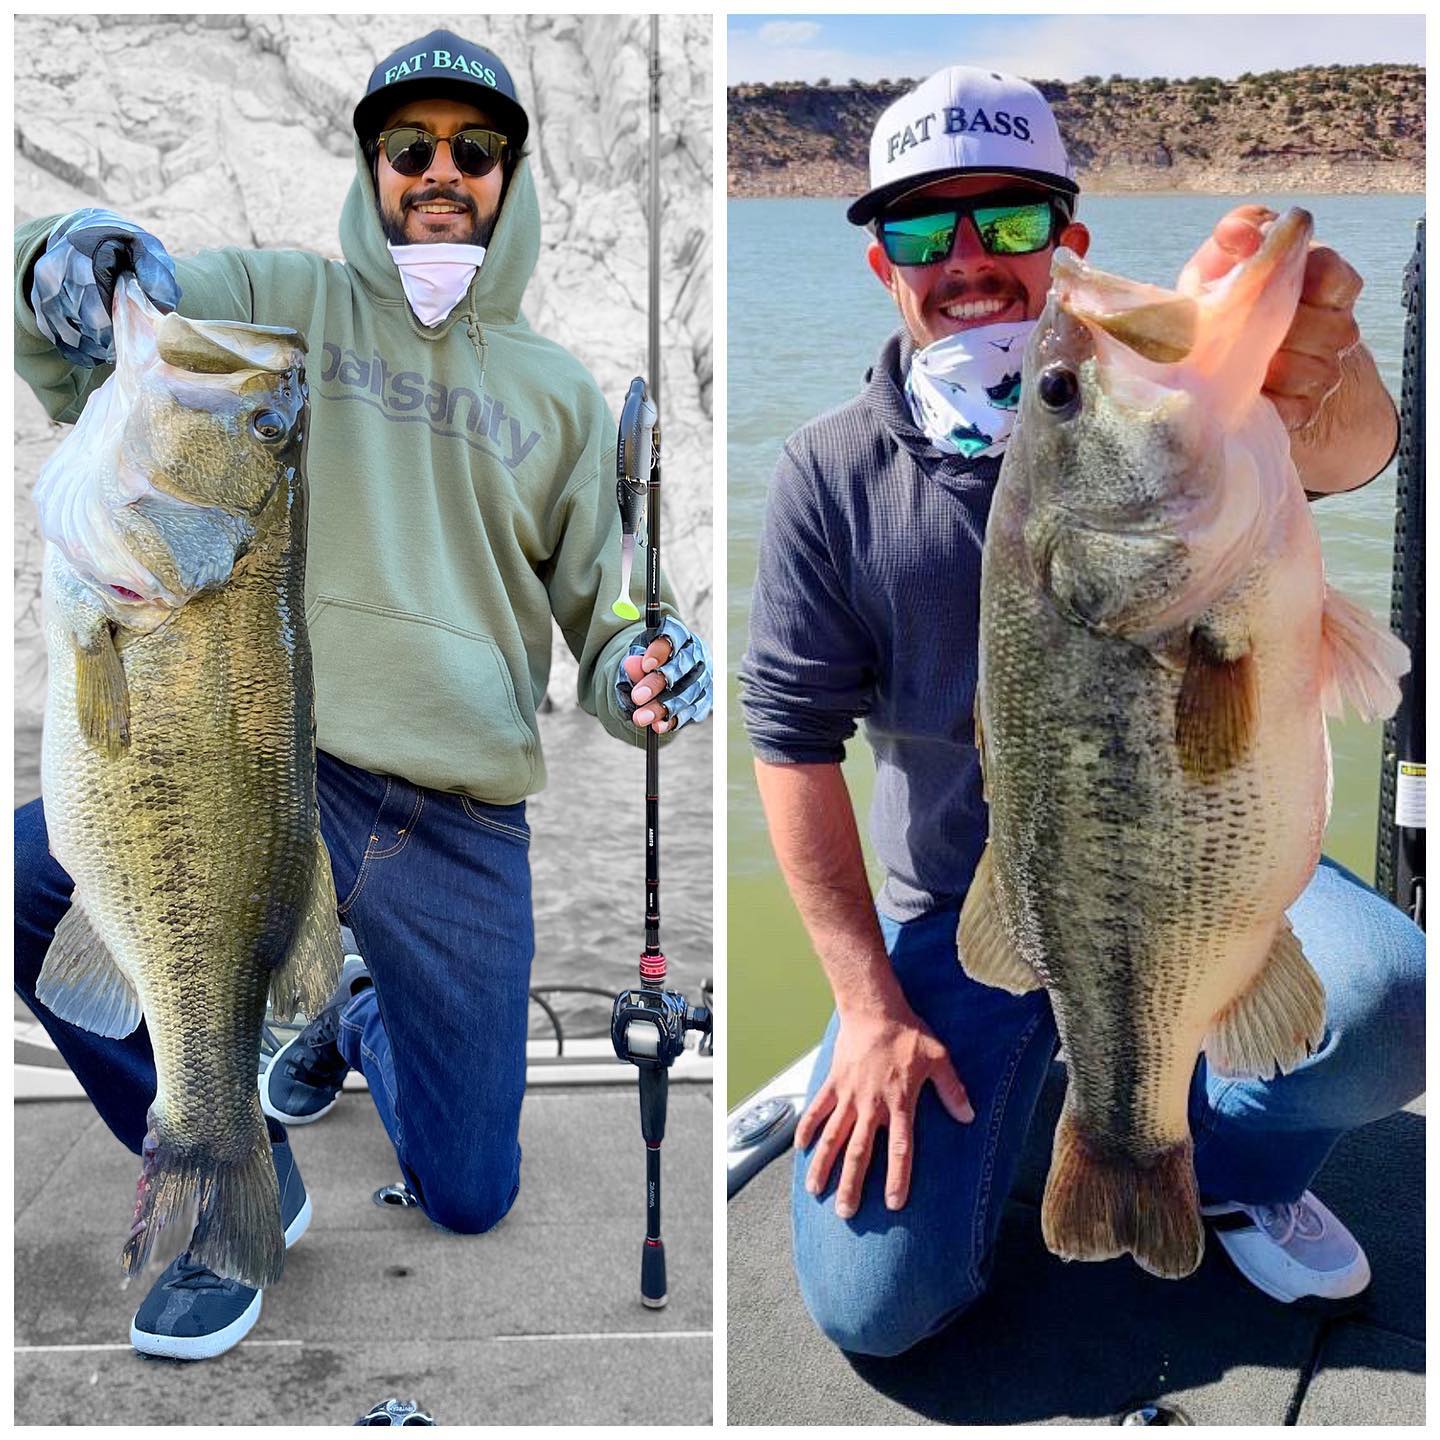 Congratulations to @fahadbaseer and @christian_gladfelter for reeling in the two biggest FAT BASS of 2021!